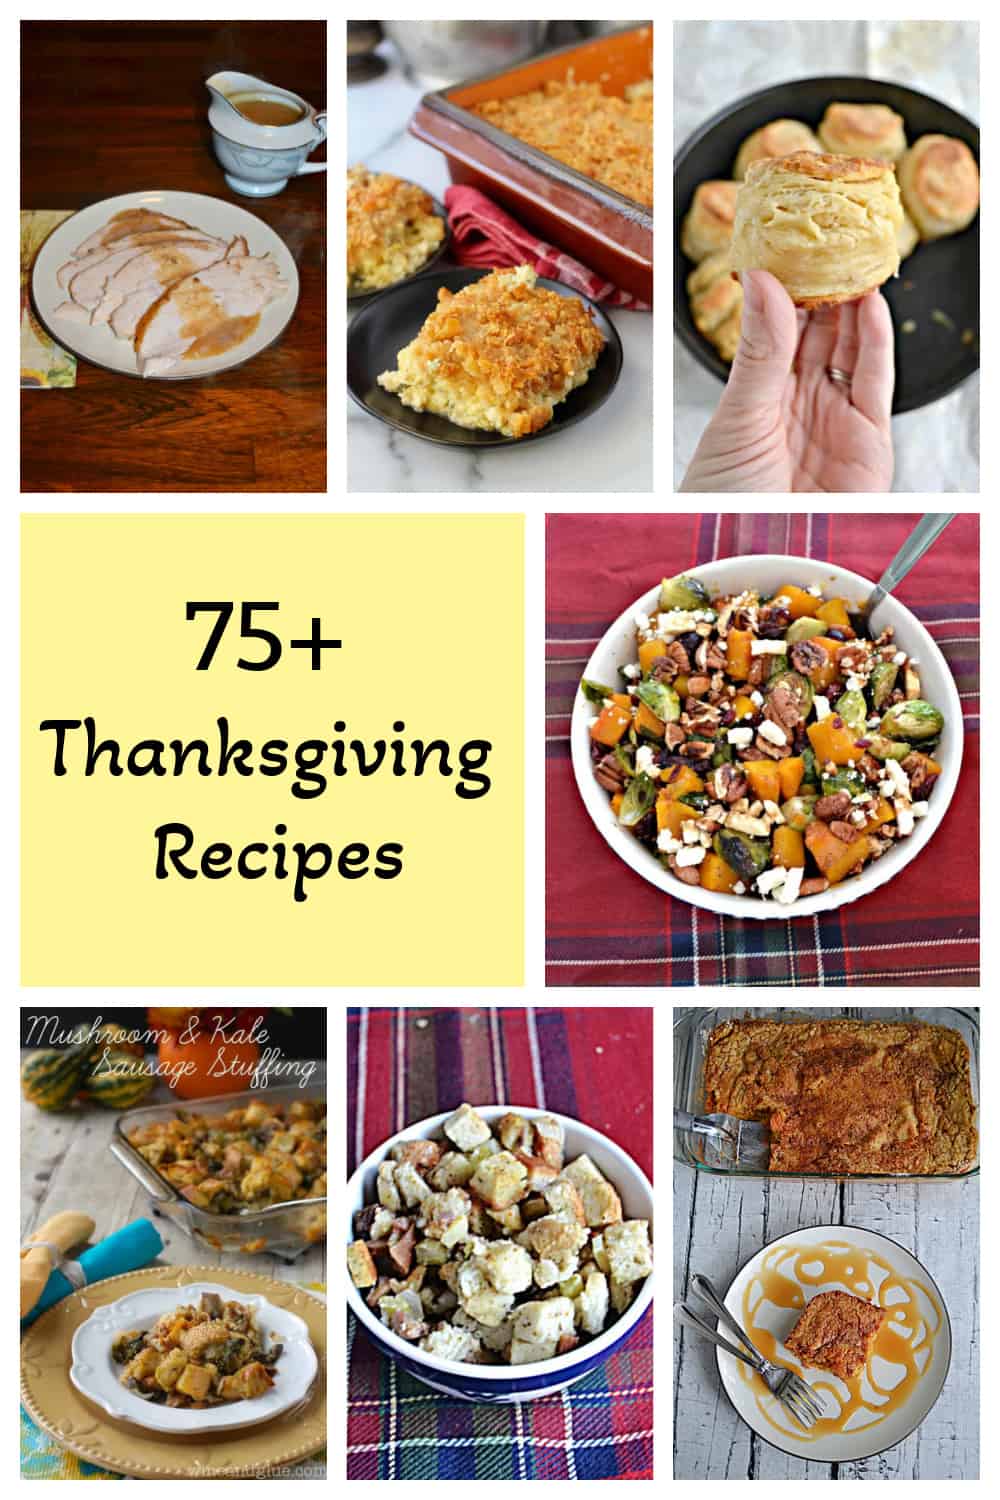 75+ Recipes for Thanksgiving!